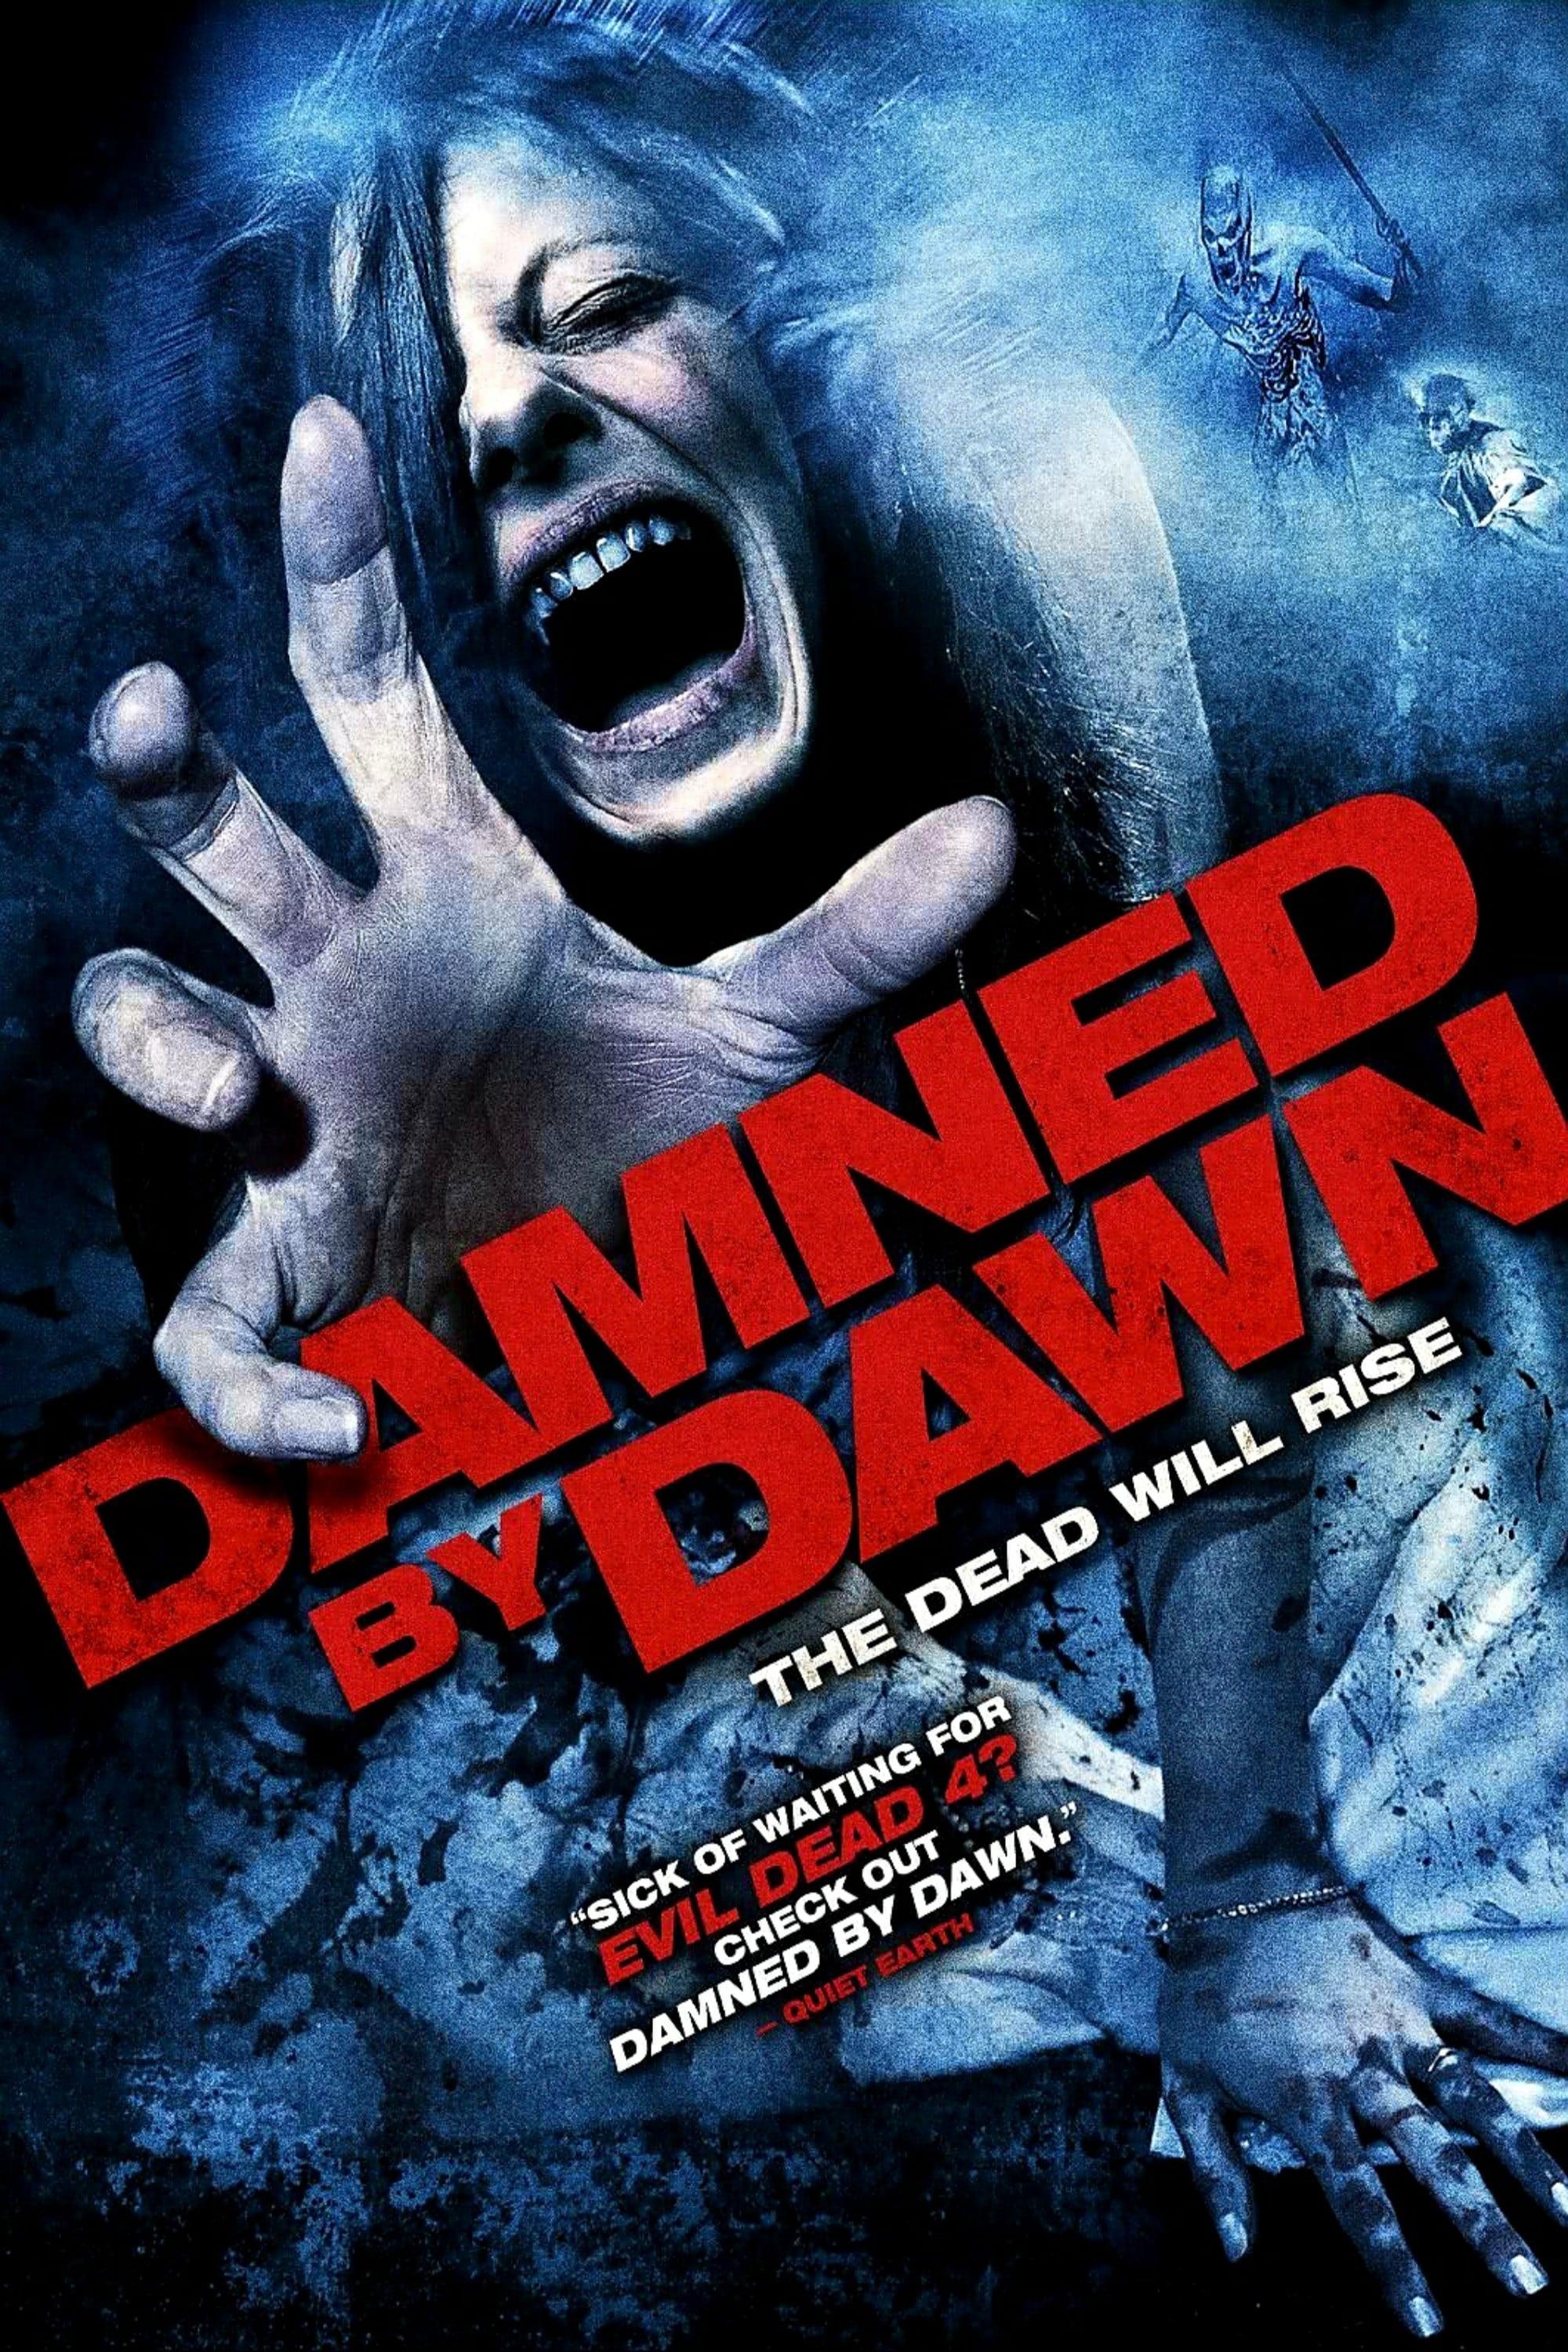 Damned by Dawn poster